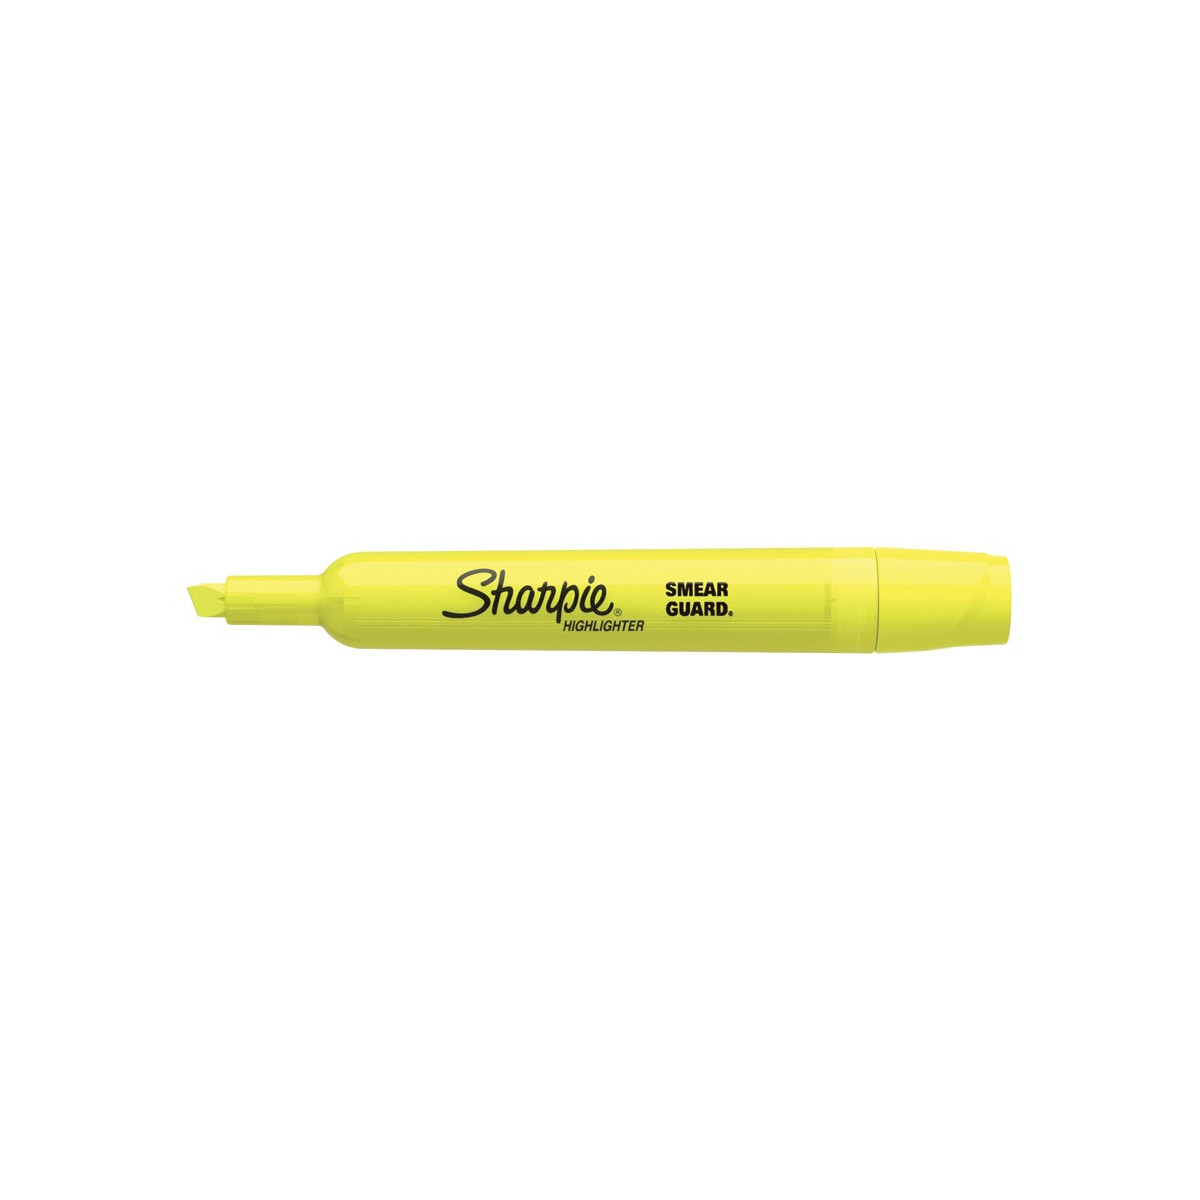 Sharpie Clear View Highlighters - Pkg of 2, Yellow, Tank Style